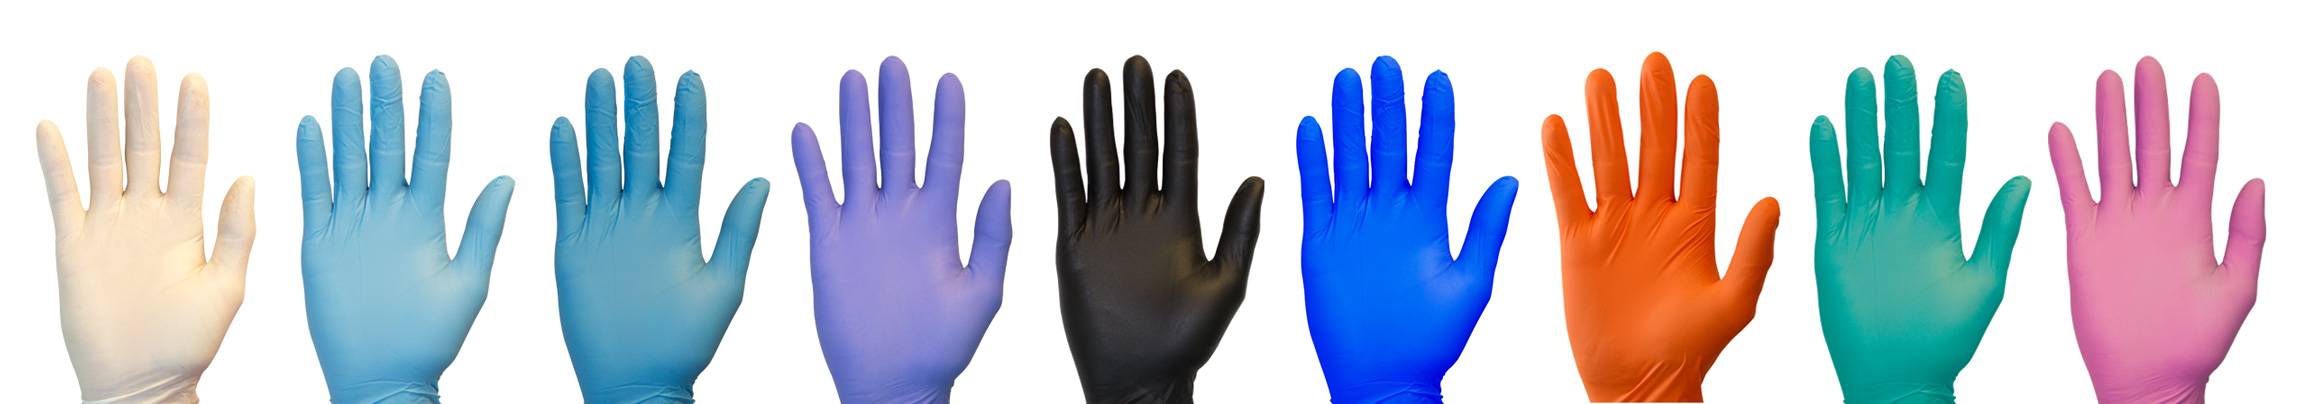 colored exam gloves